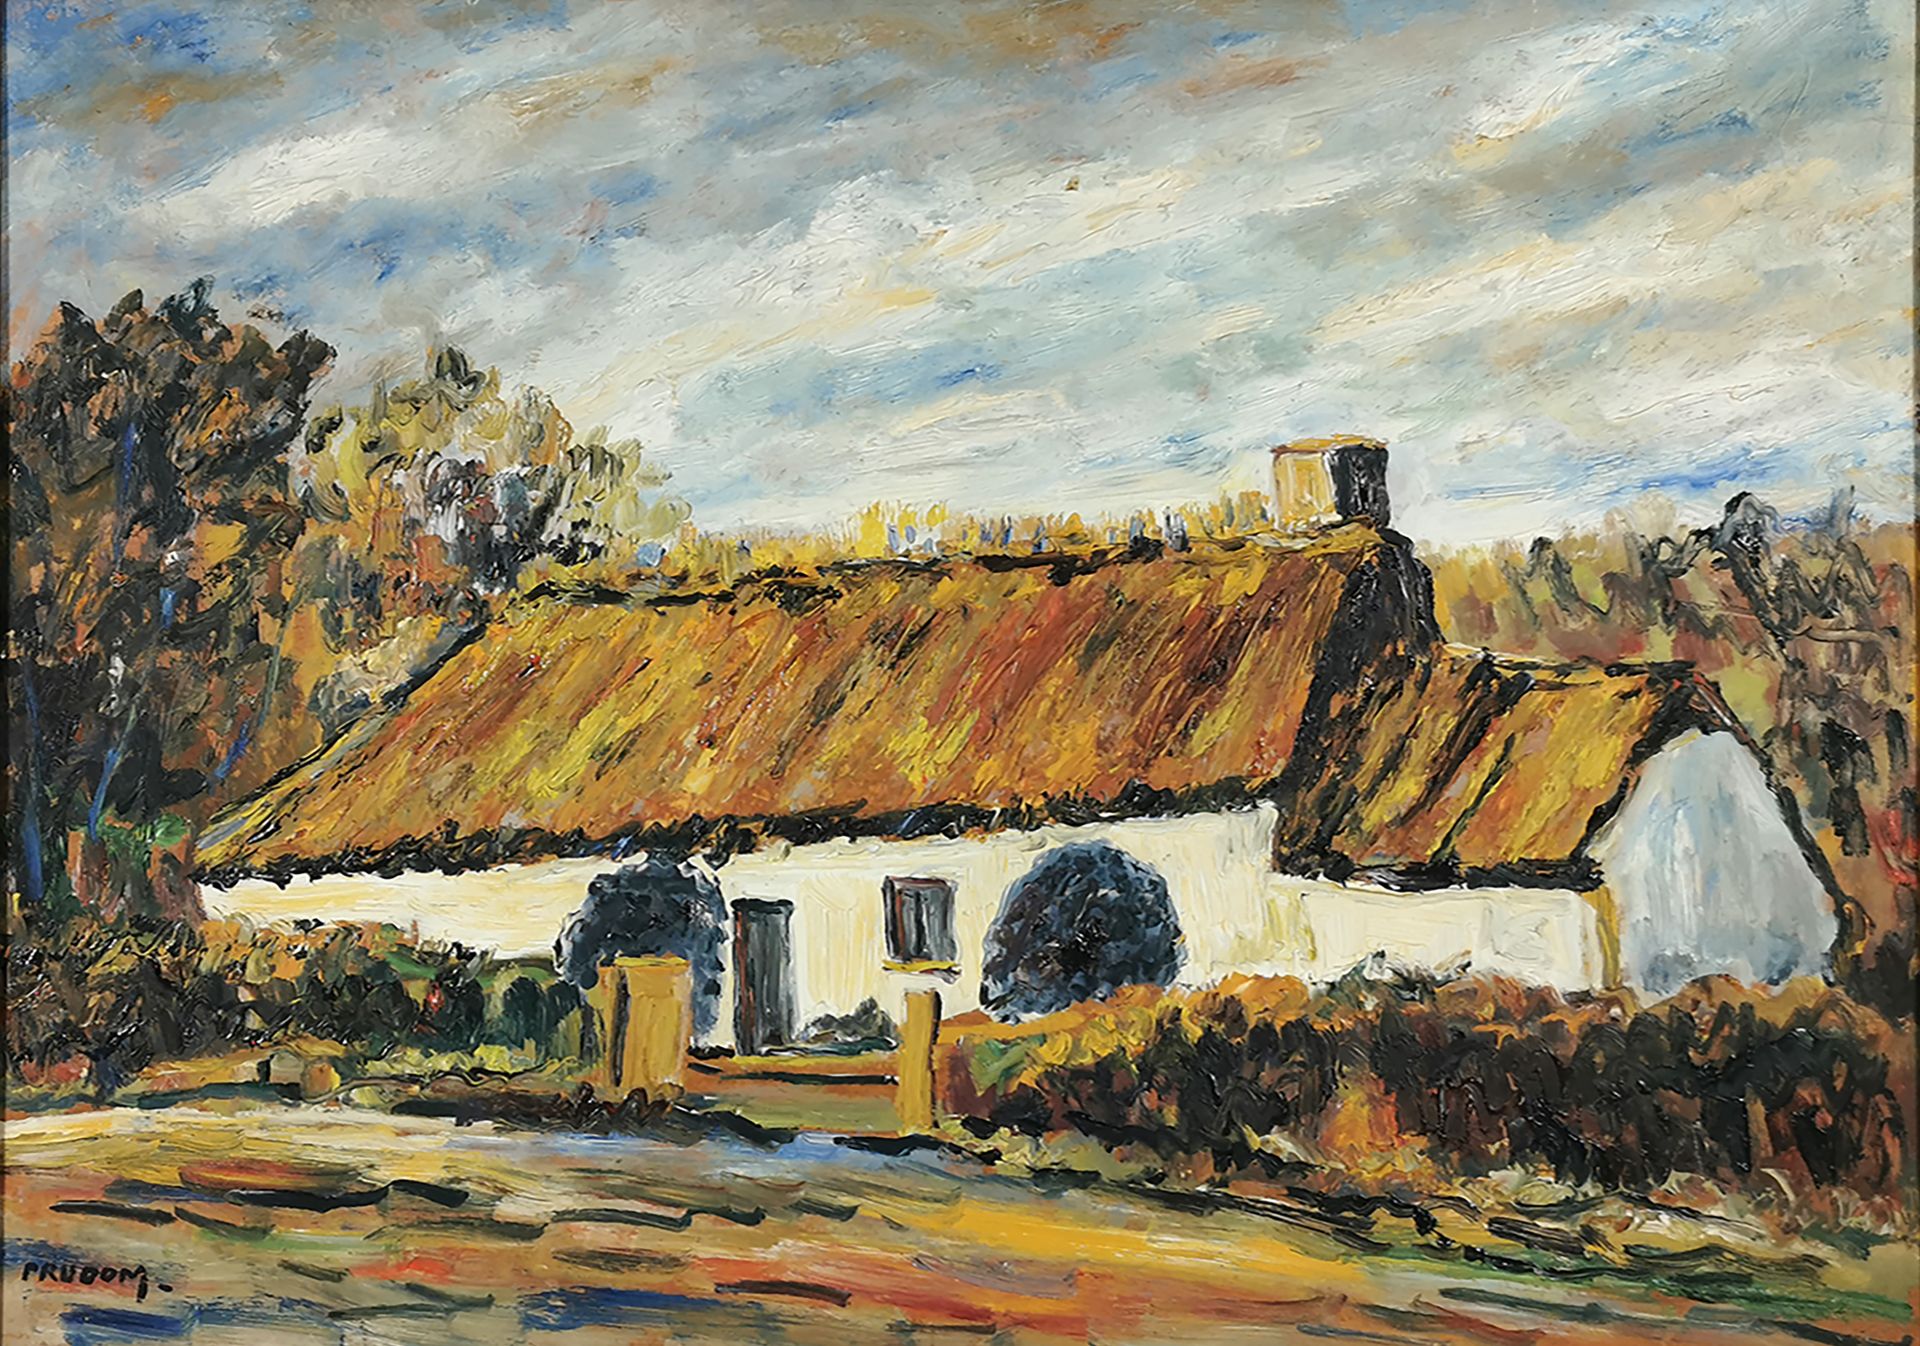 Null PRUDOM, Georges PRUD'HOMME (1927-1992)

The Thatched Cottage

Oil on isorel&hellip;